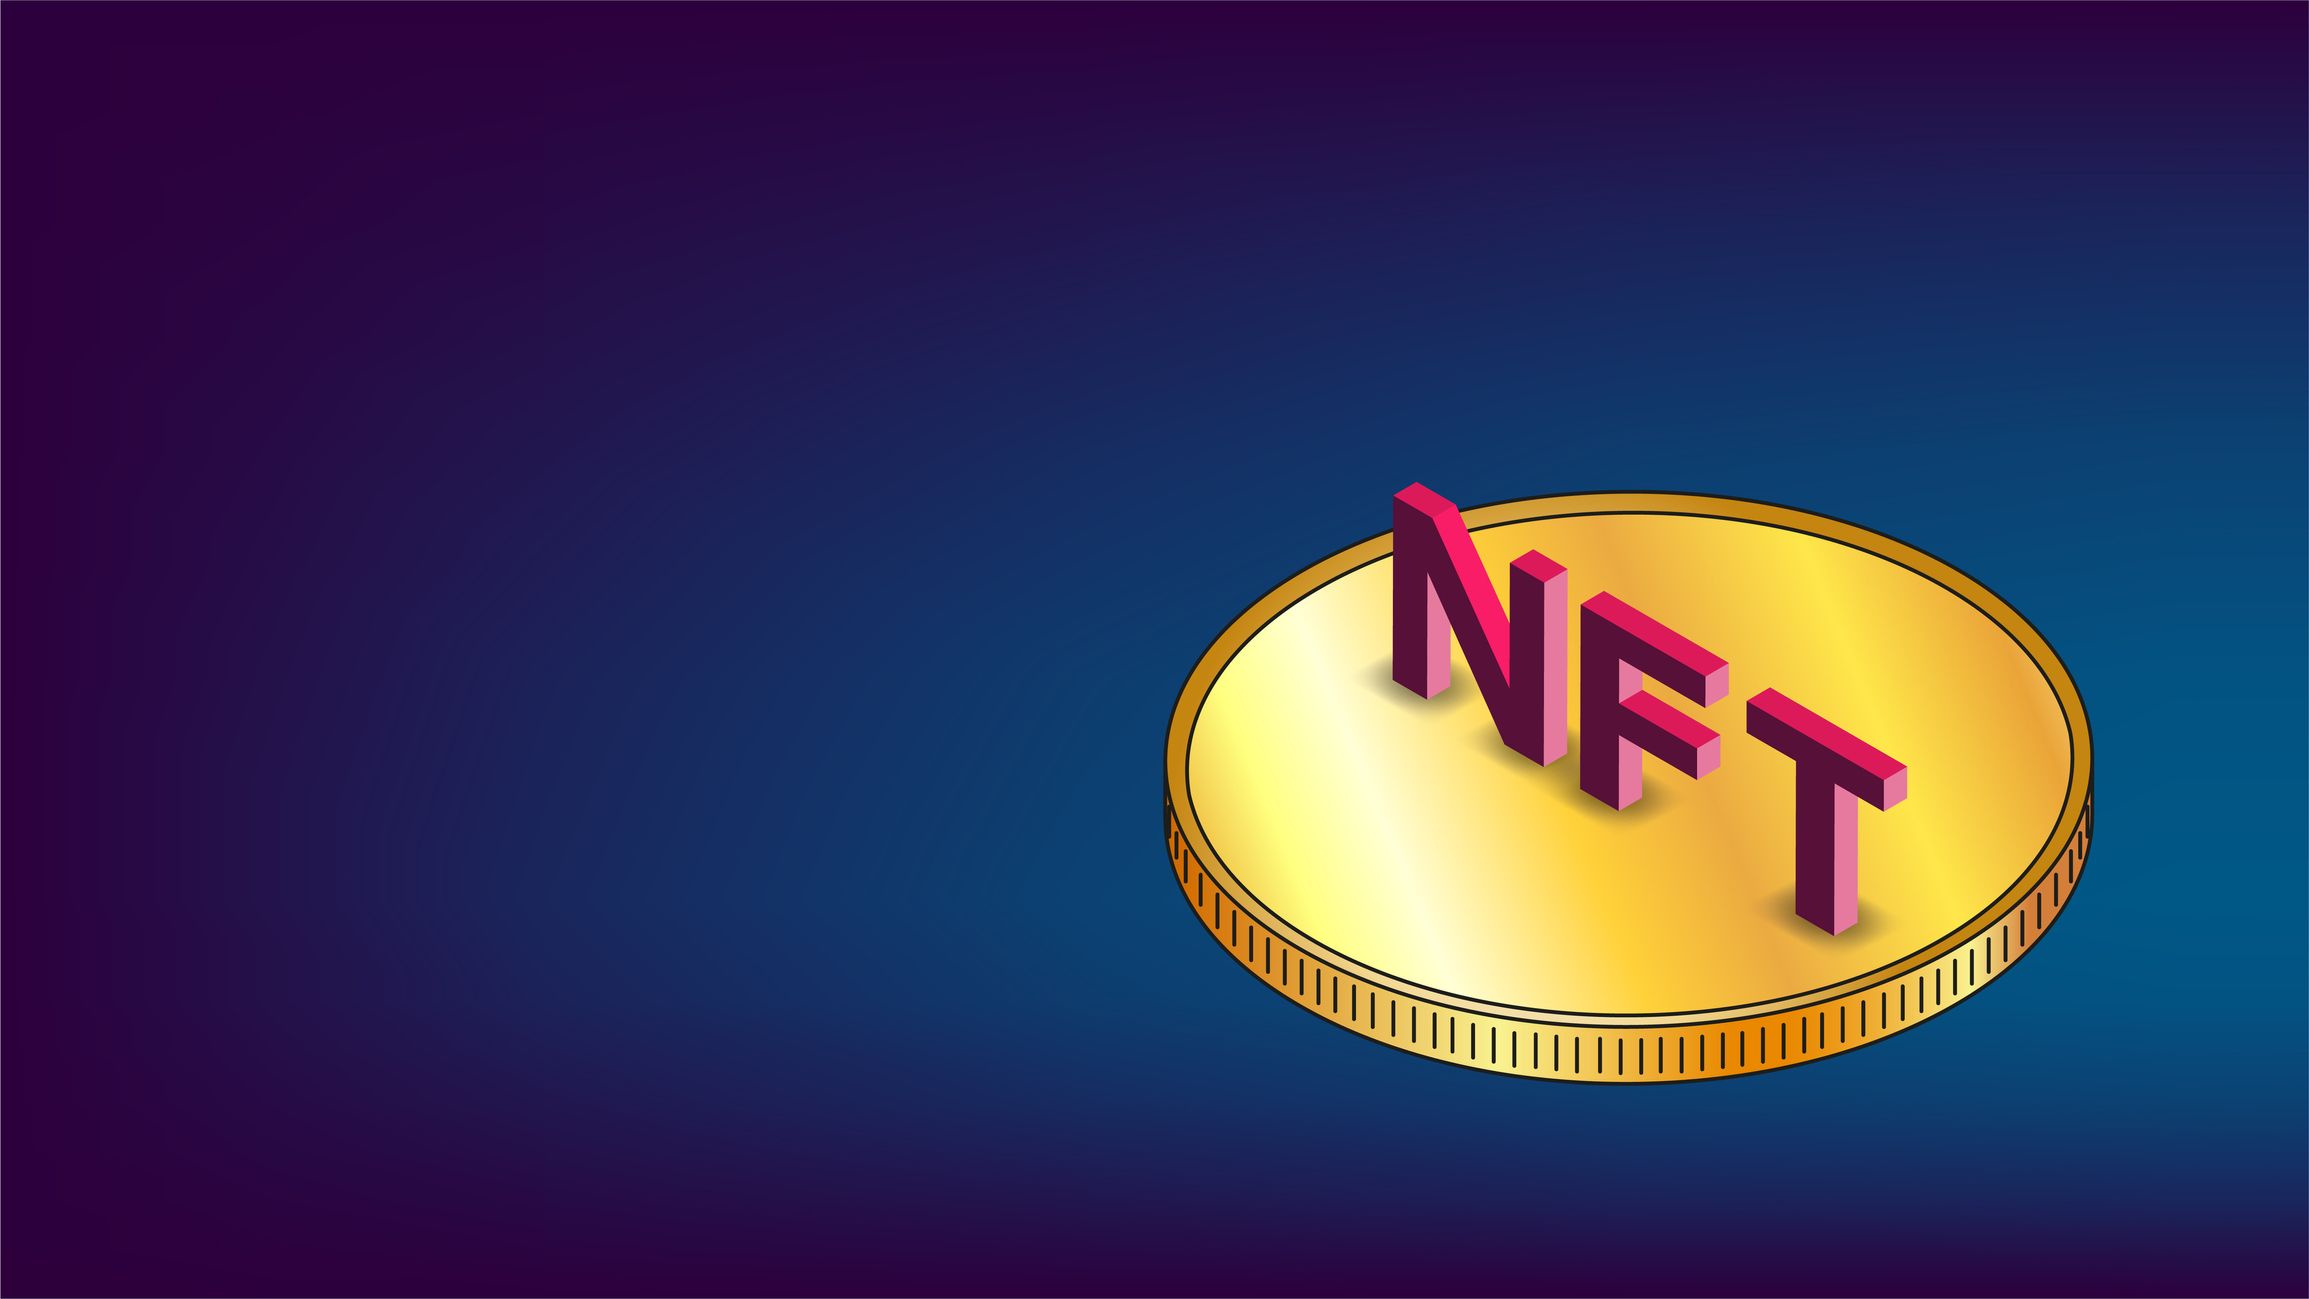 Top 5 Most Popular NFTs That You Should Know About